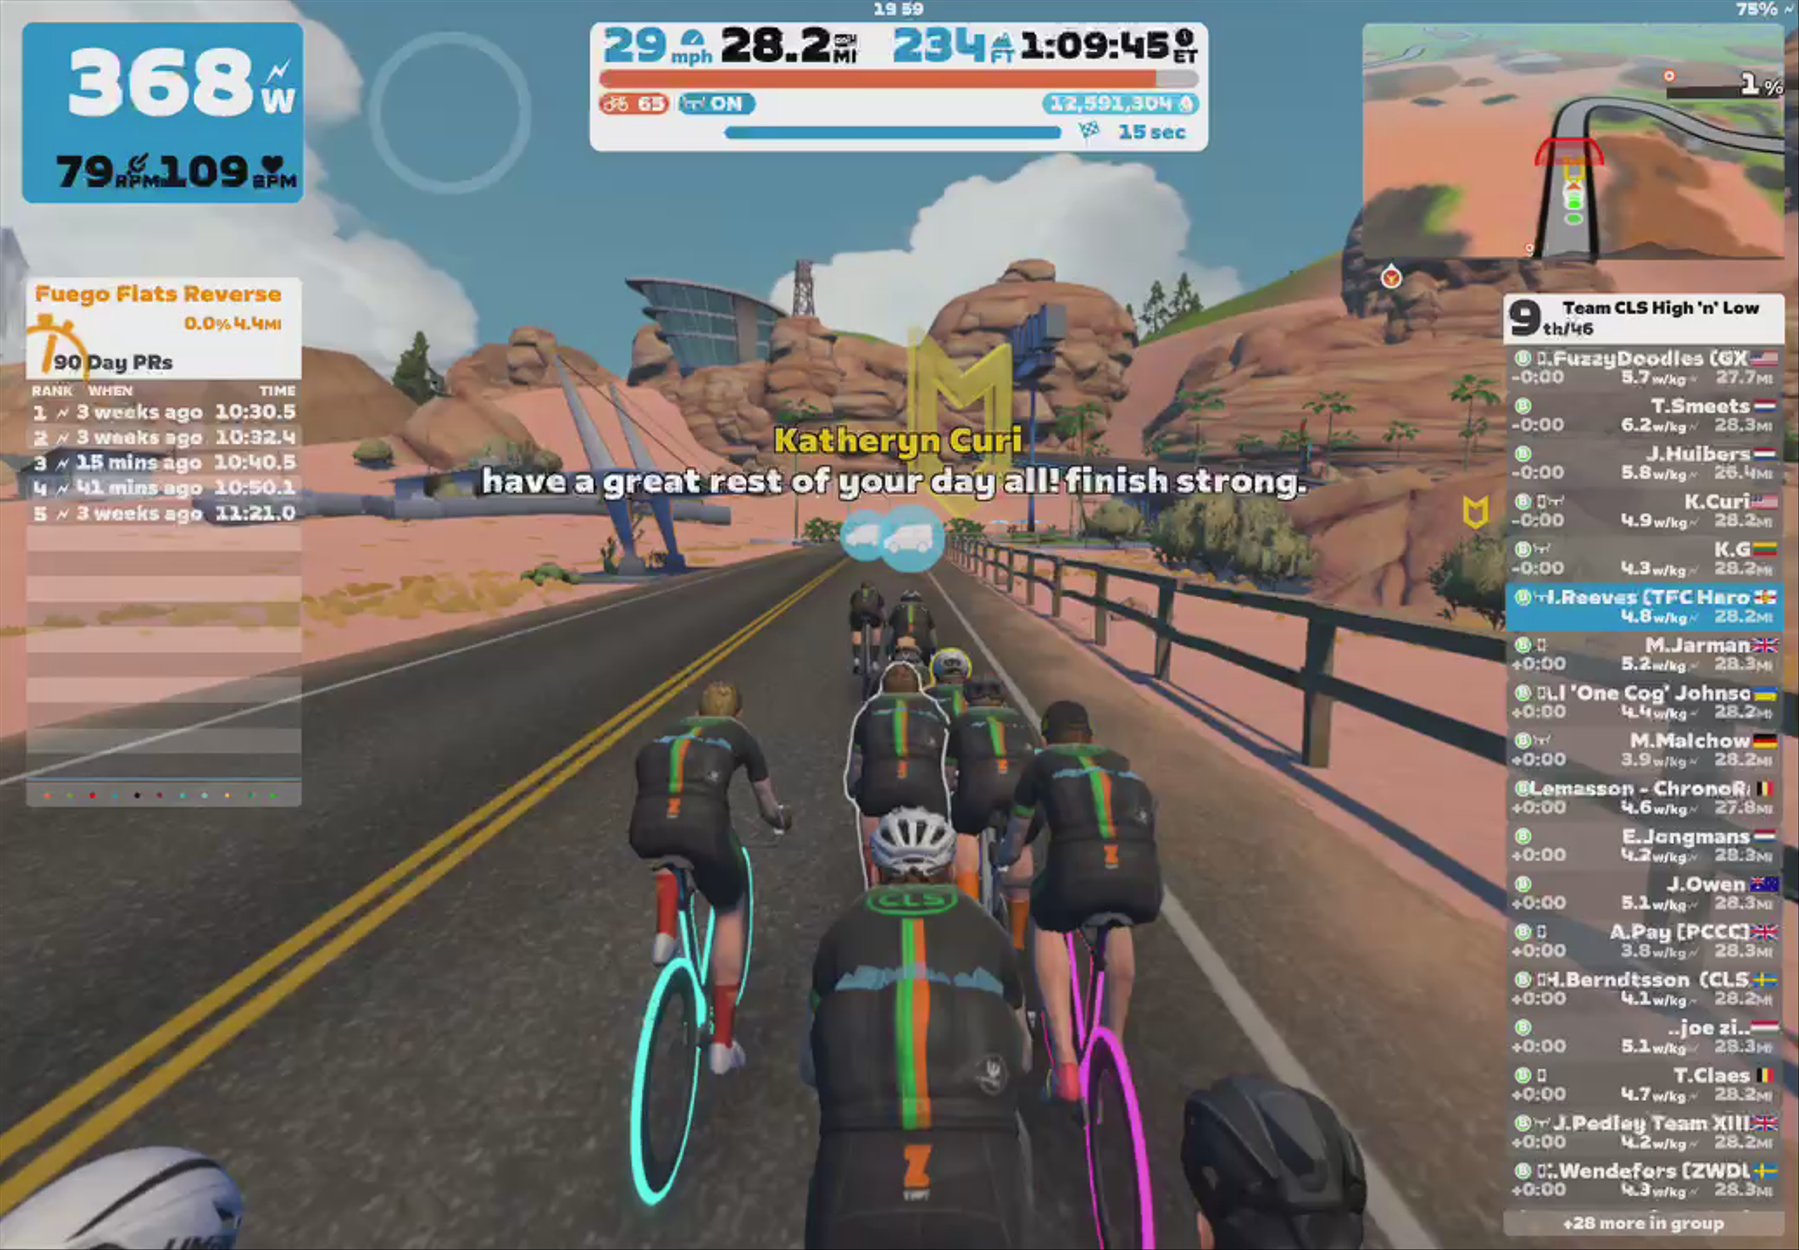 Zwift - Group Ride: Team CLS High 'n' Low (B) on Tempus Fugit in Watopia